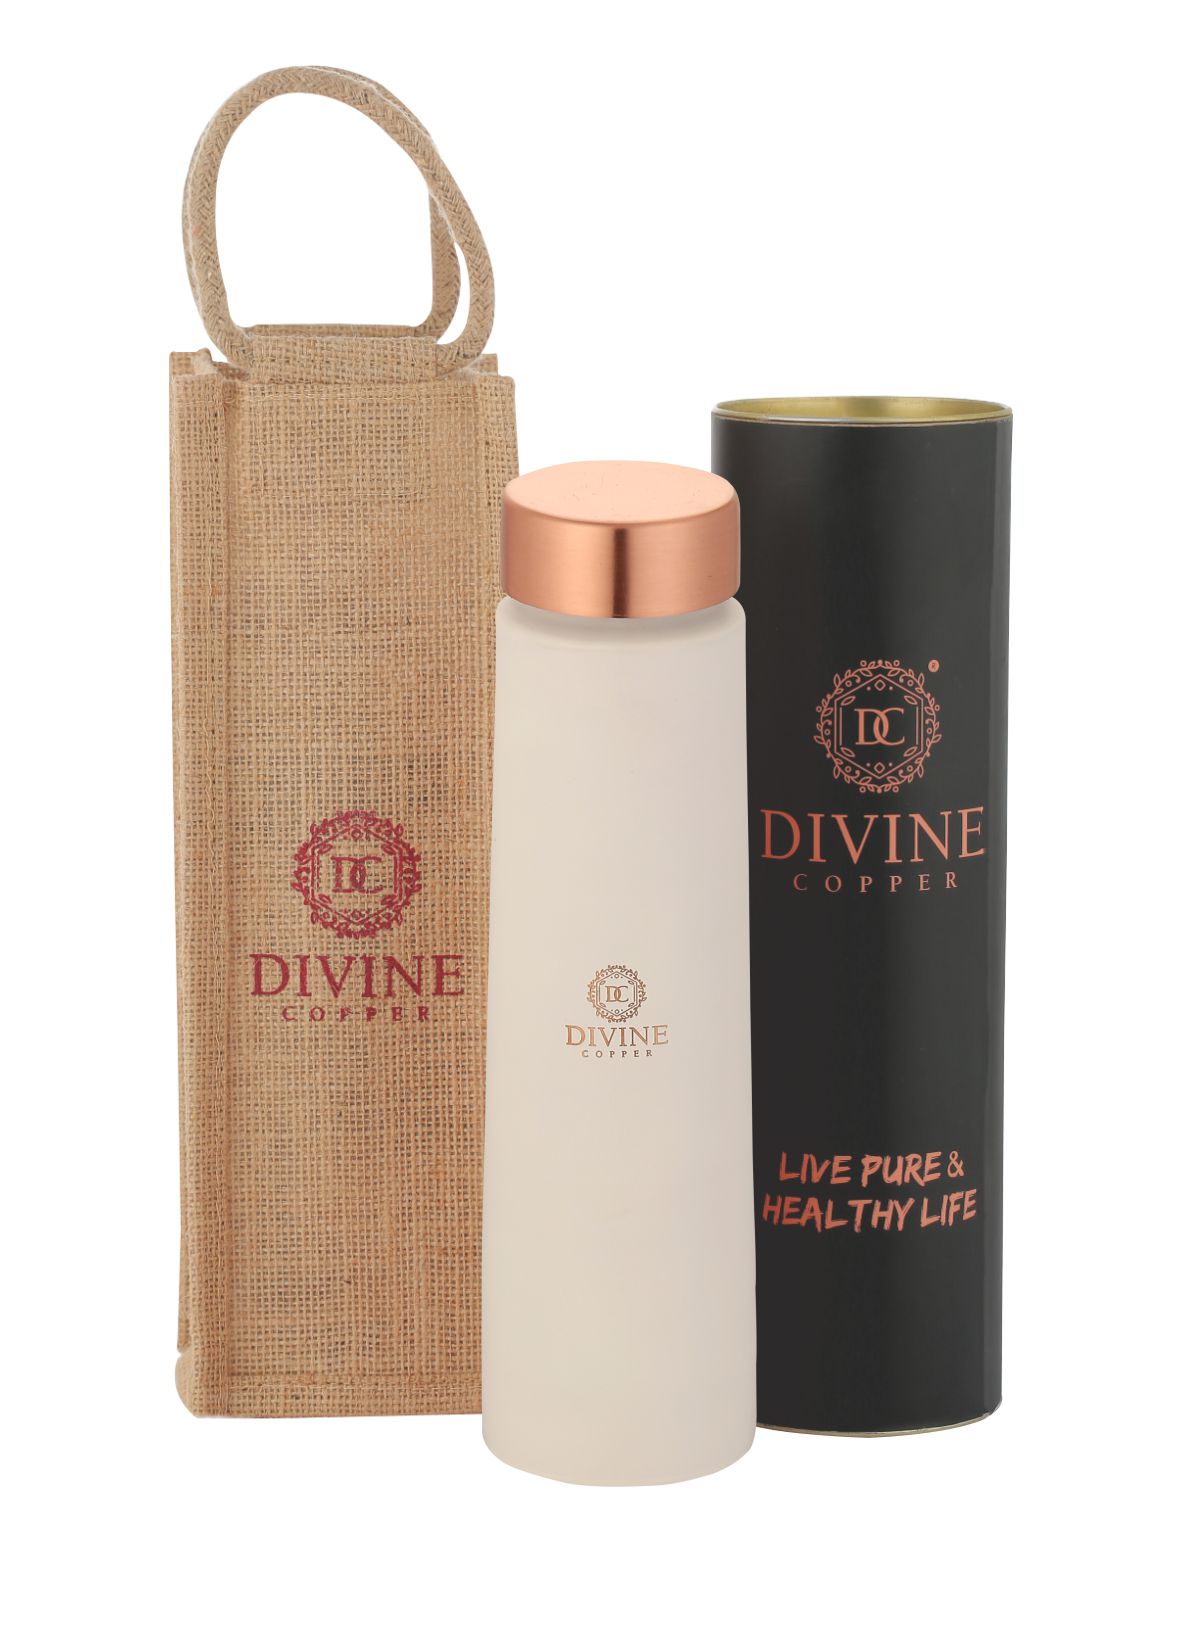 Eclair white 900ml copper bottle with free jute carry bag